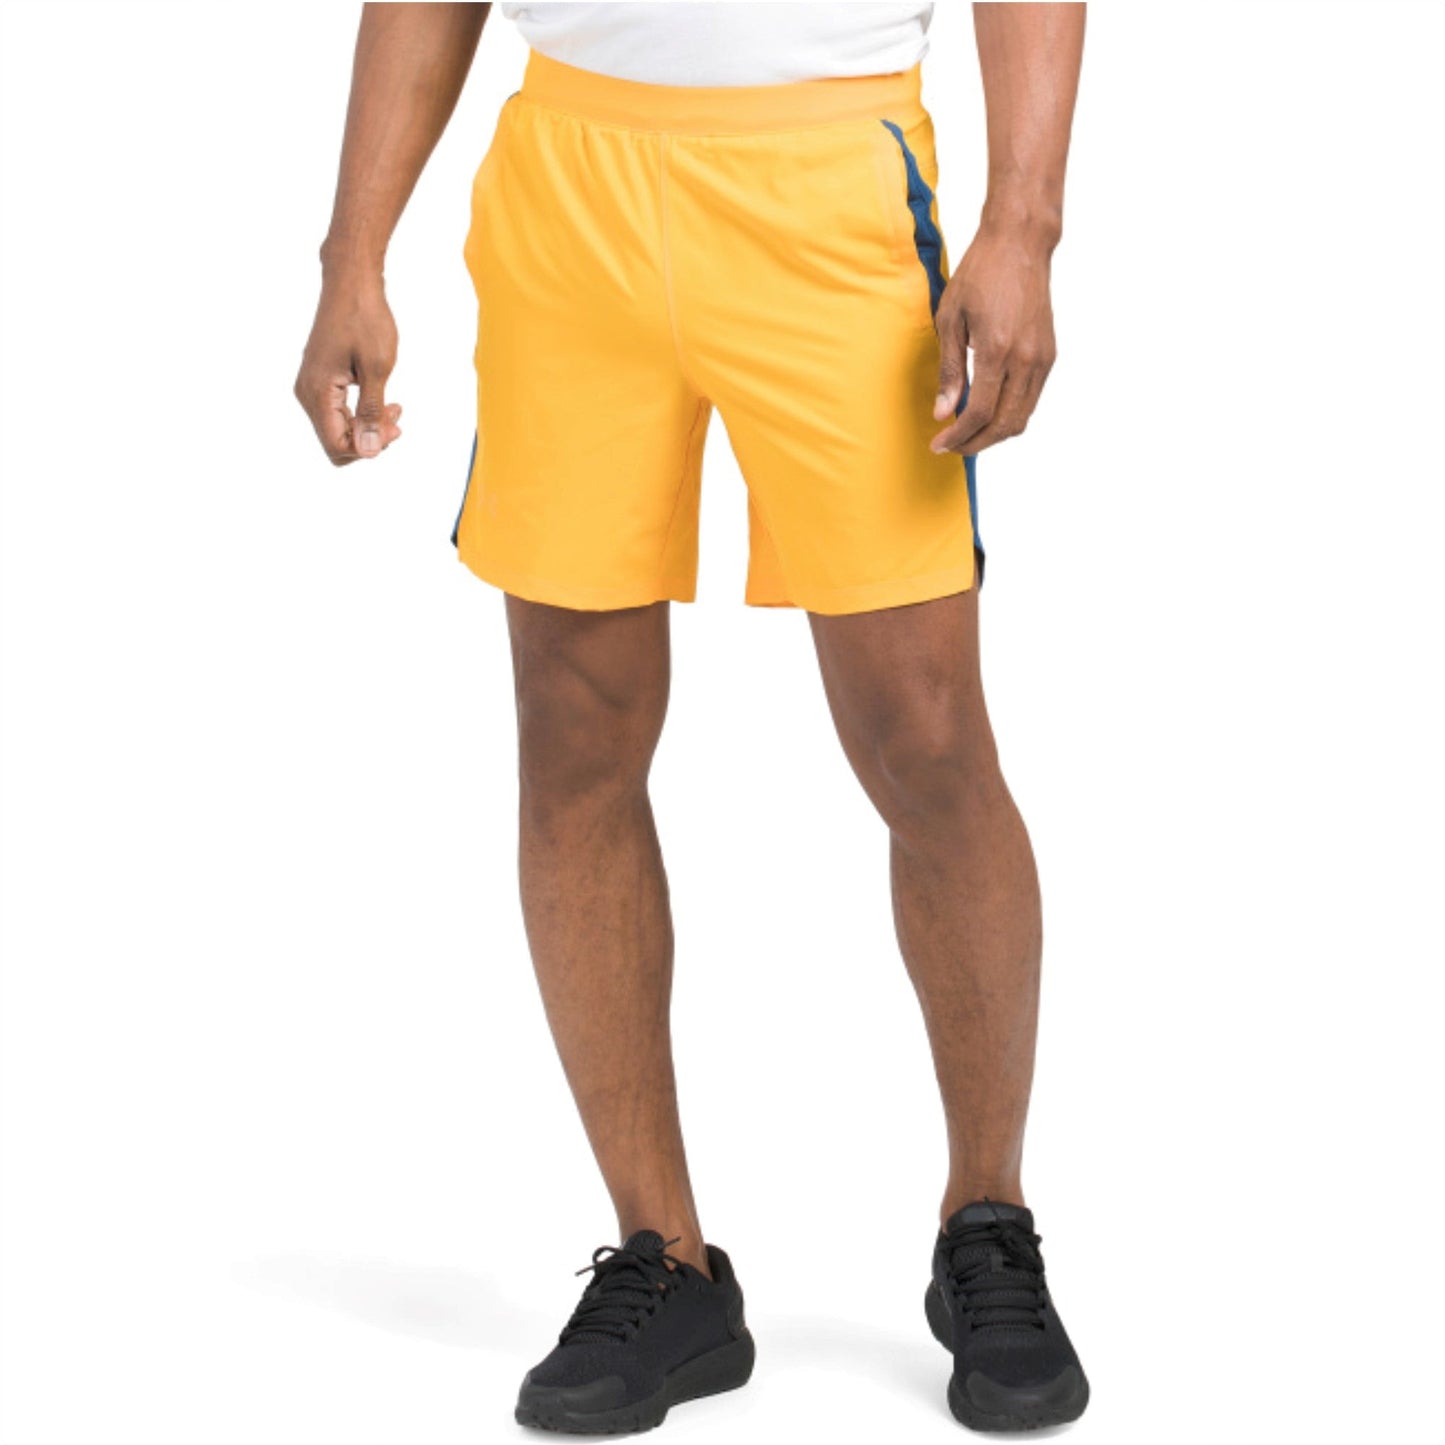 Under Armour Men's Launch Ultra Light Stretch Moisture Wicking Active Shorts